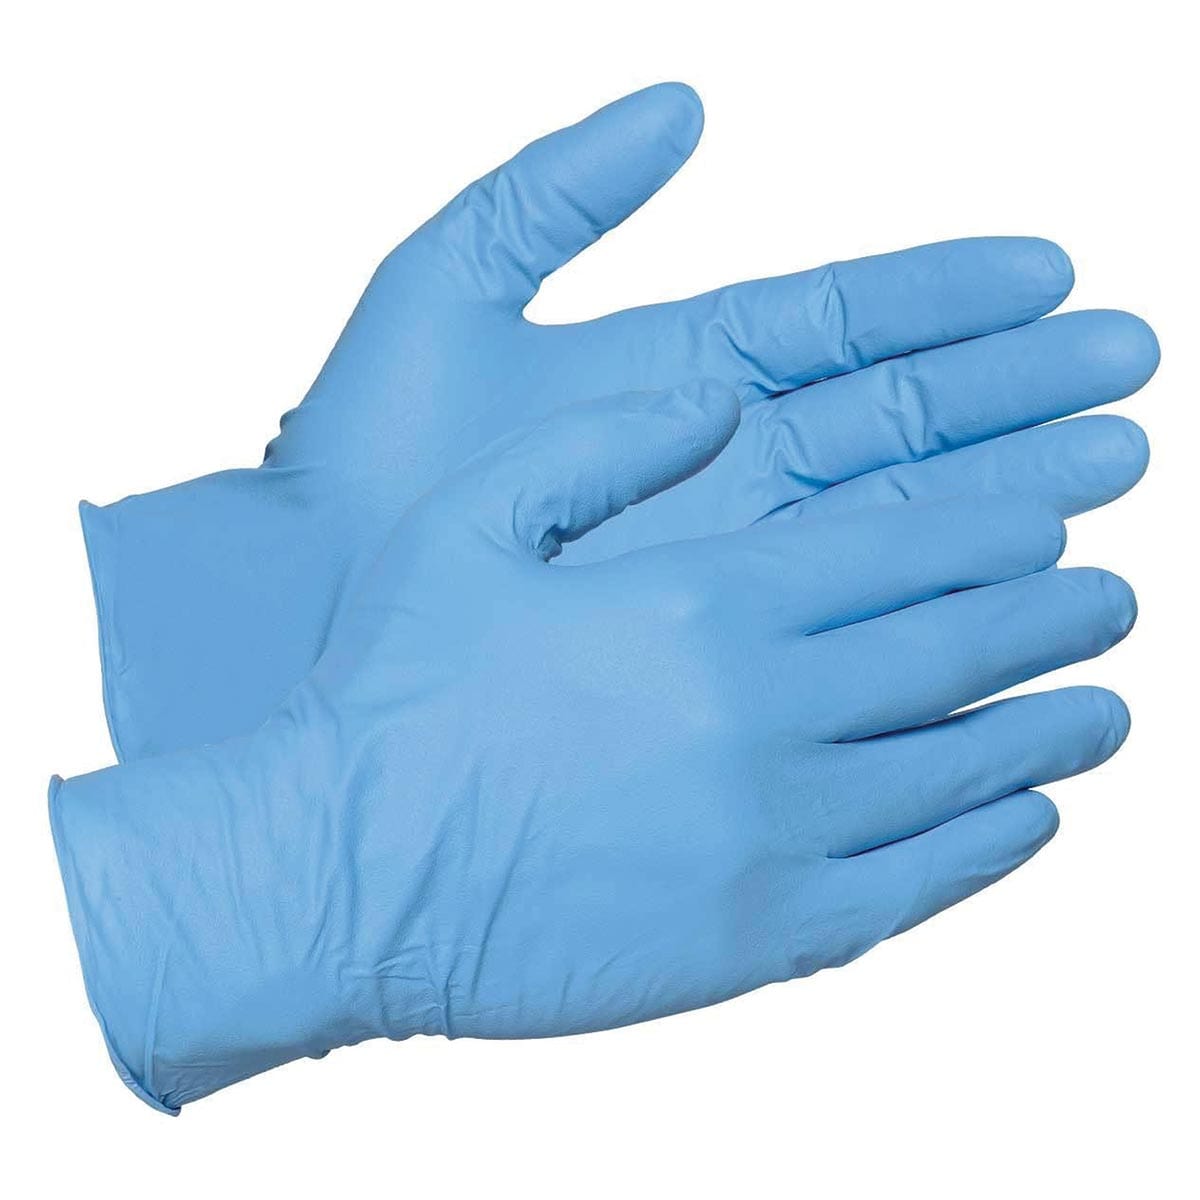 Gemplers 4-mil Disposable Nitrile Gloves, S, BucKit of 500 gloves